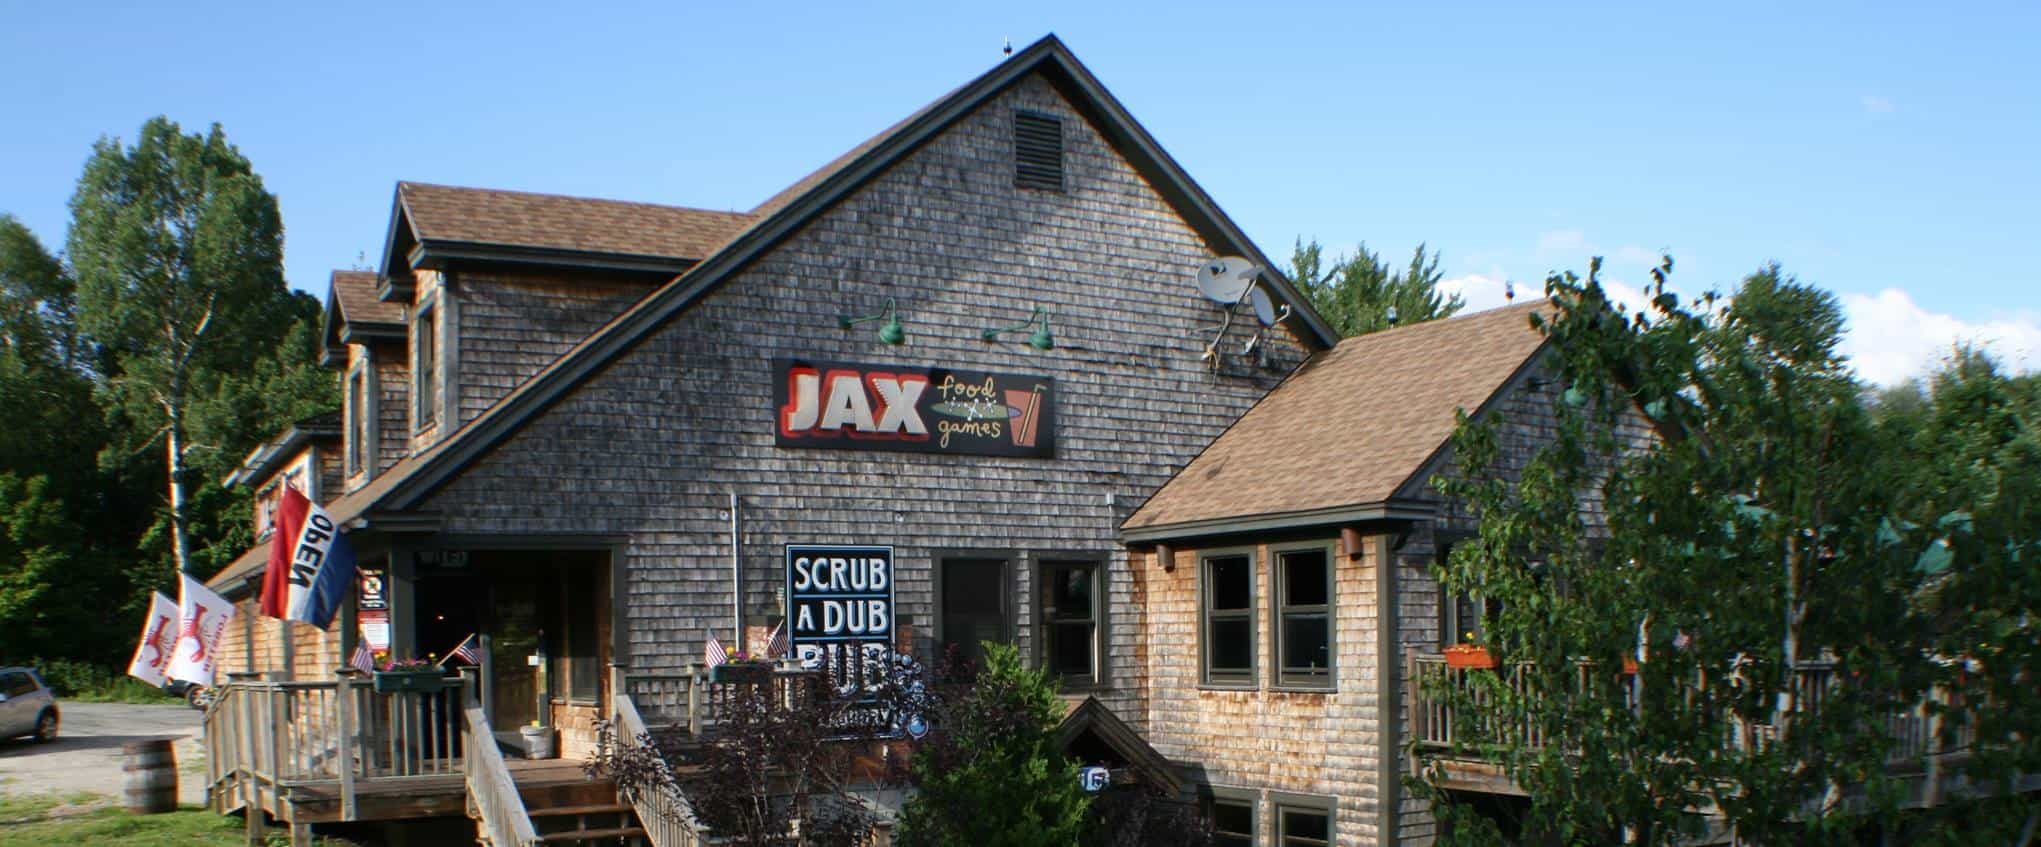 JAX Food & Games - Building Exterior with Sign